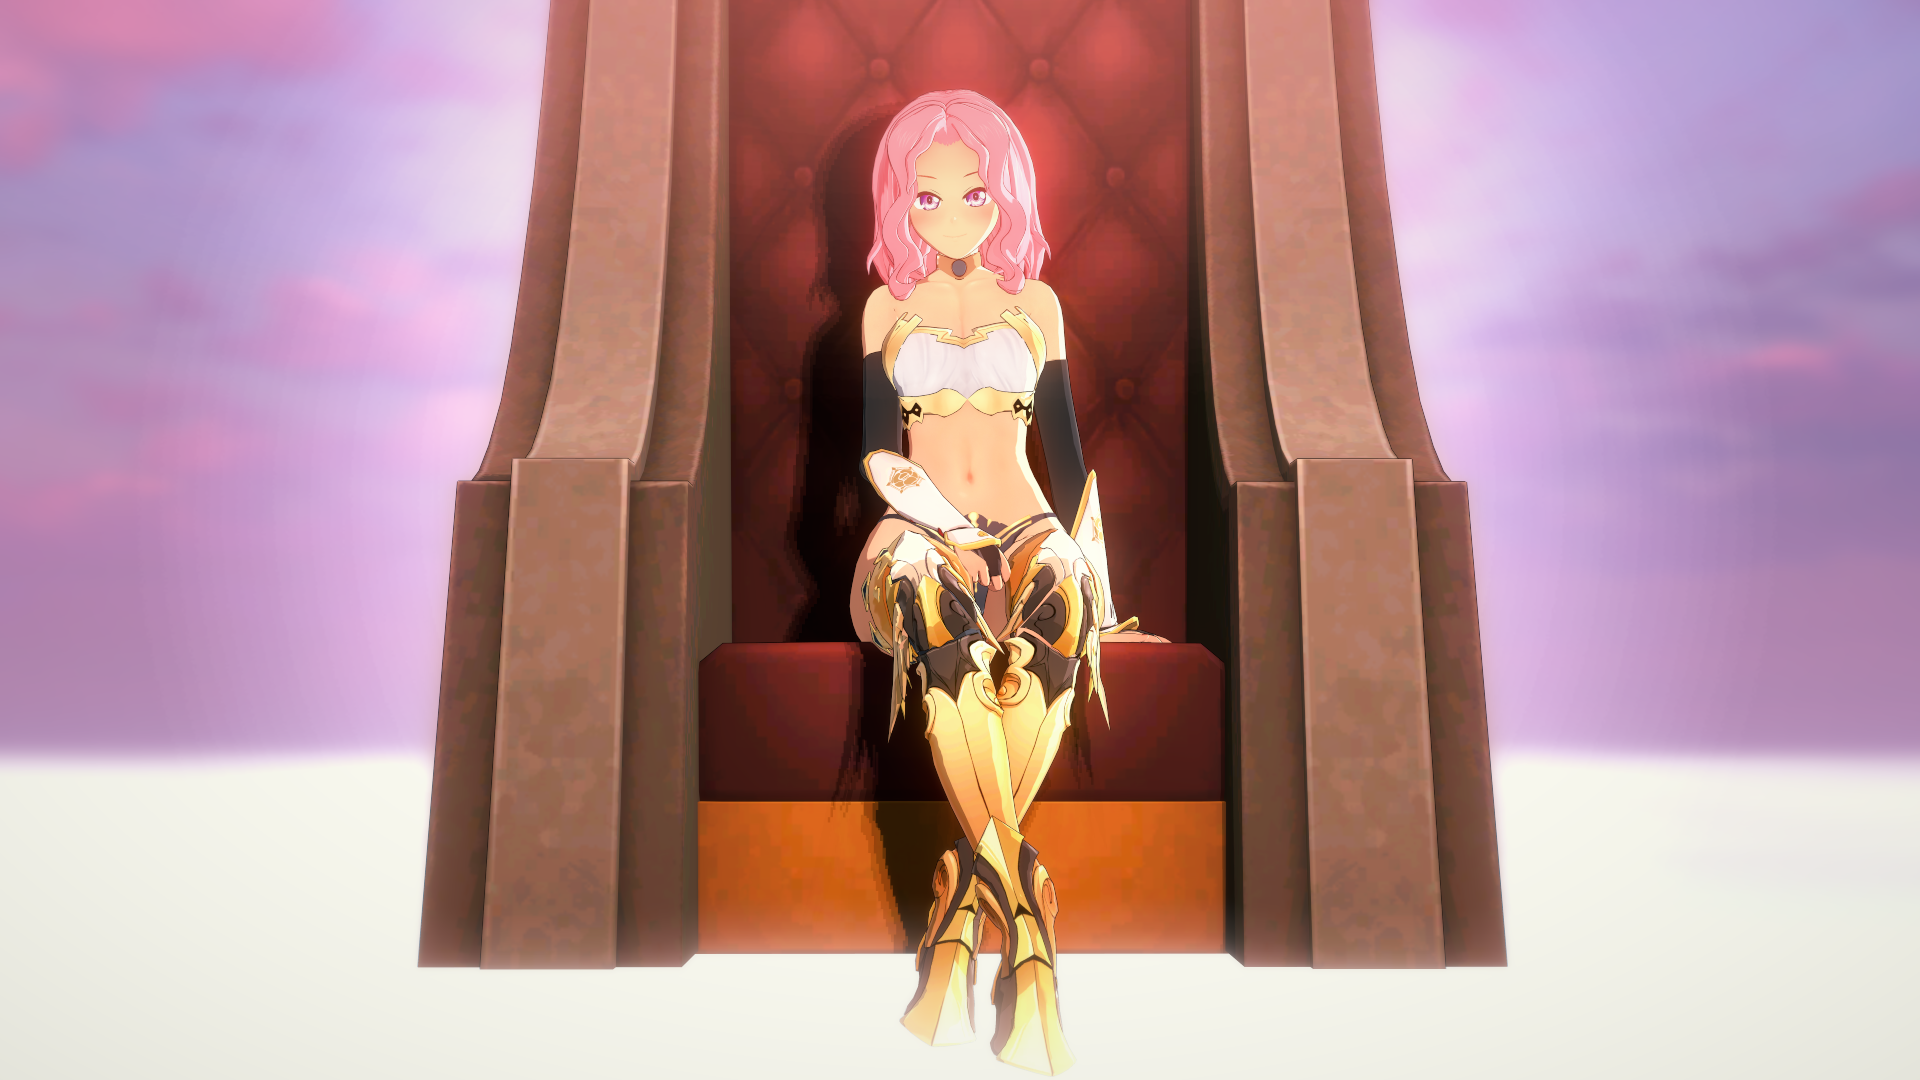 Pink World Donwloding - The Nobody in a Hero's World - free game download, reviews, mega - xGames